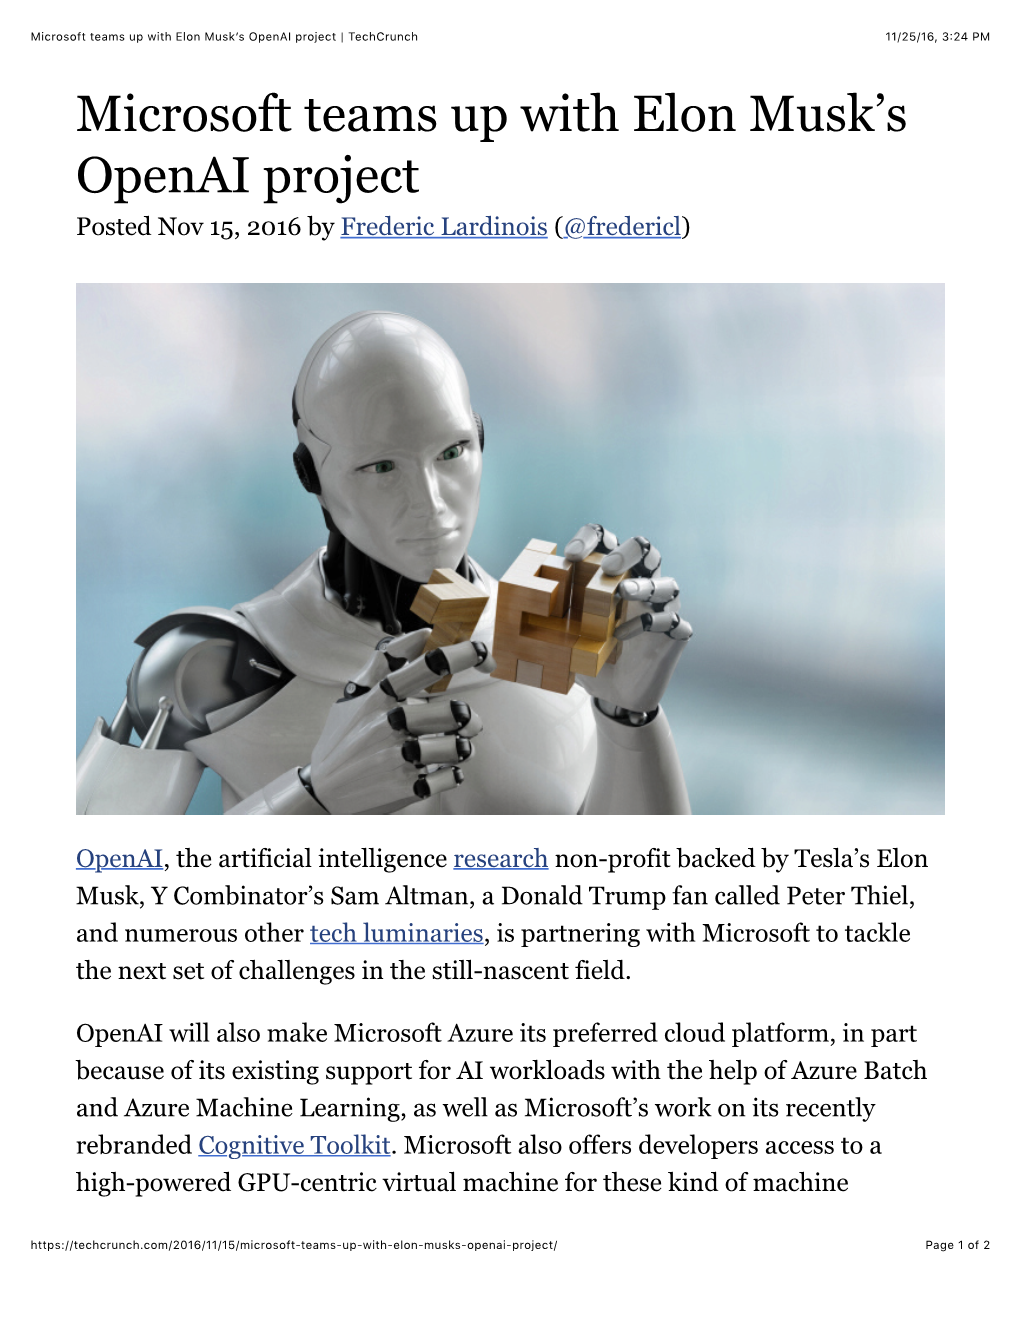 Microsoft Teams up with Elon Musk's Openai Project